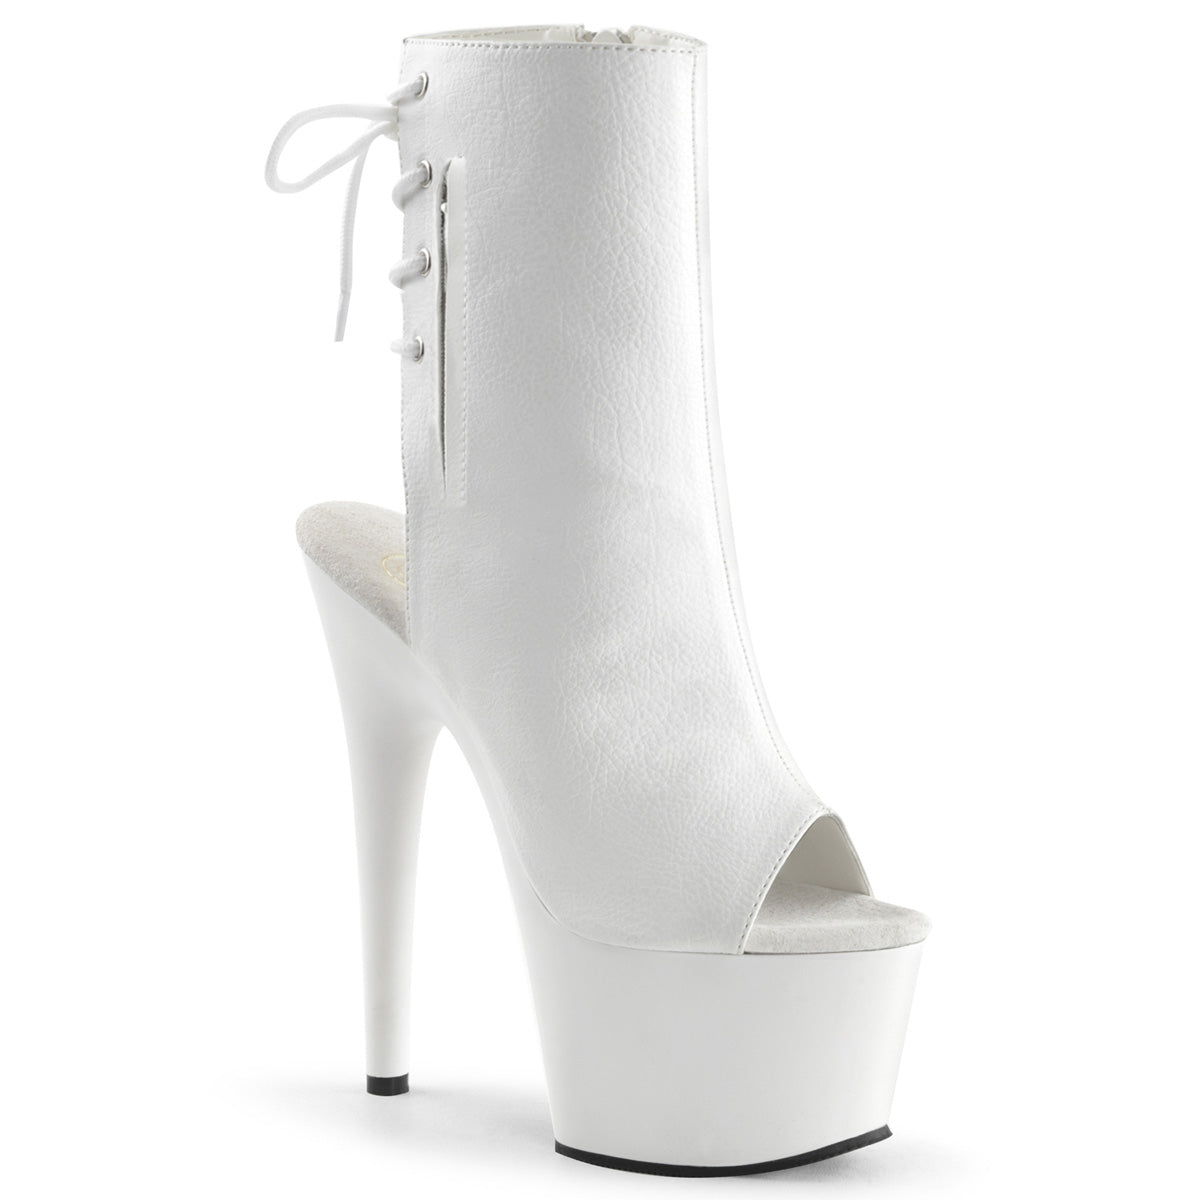 ADORE-1018 Pleasers 7 Inch Heel White Strippers Ankle Boots